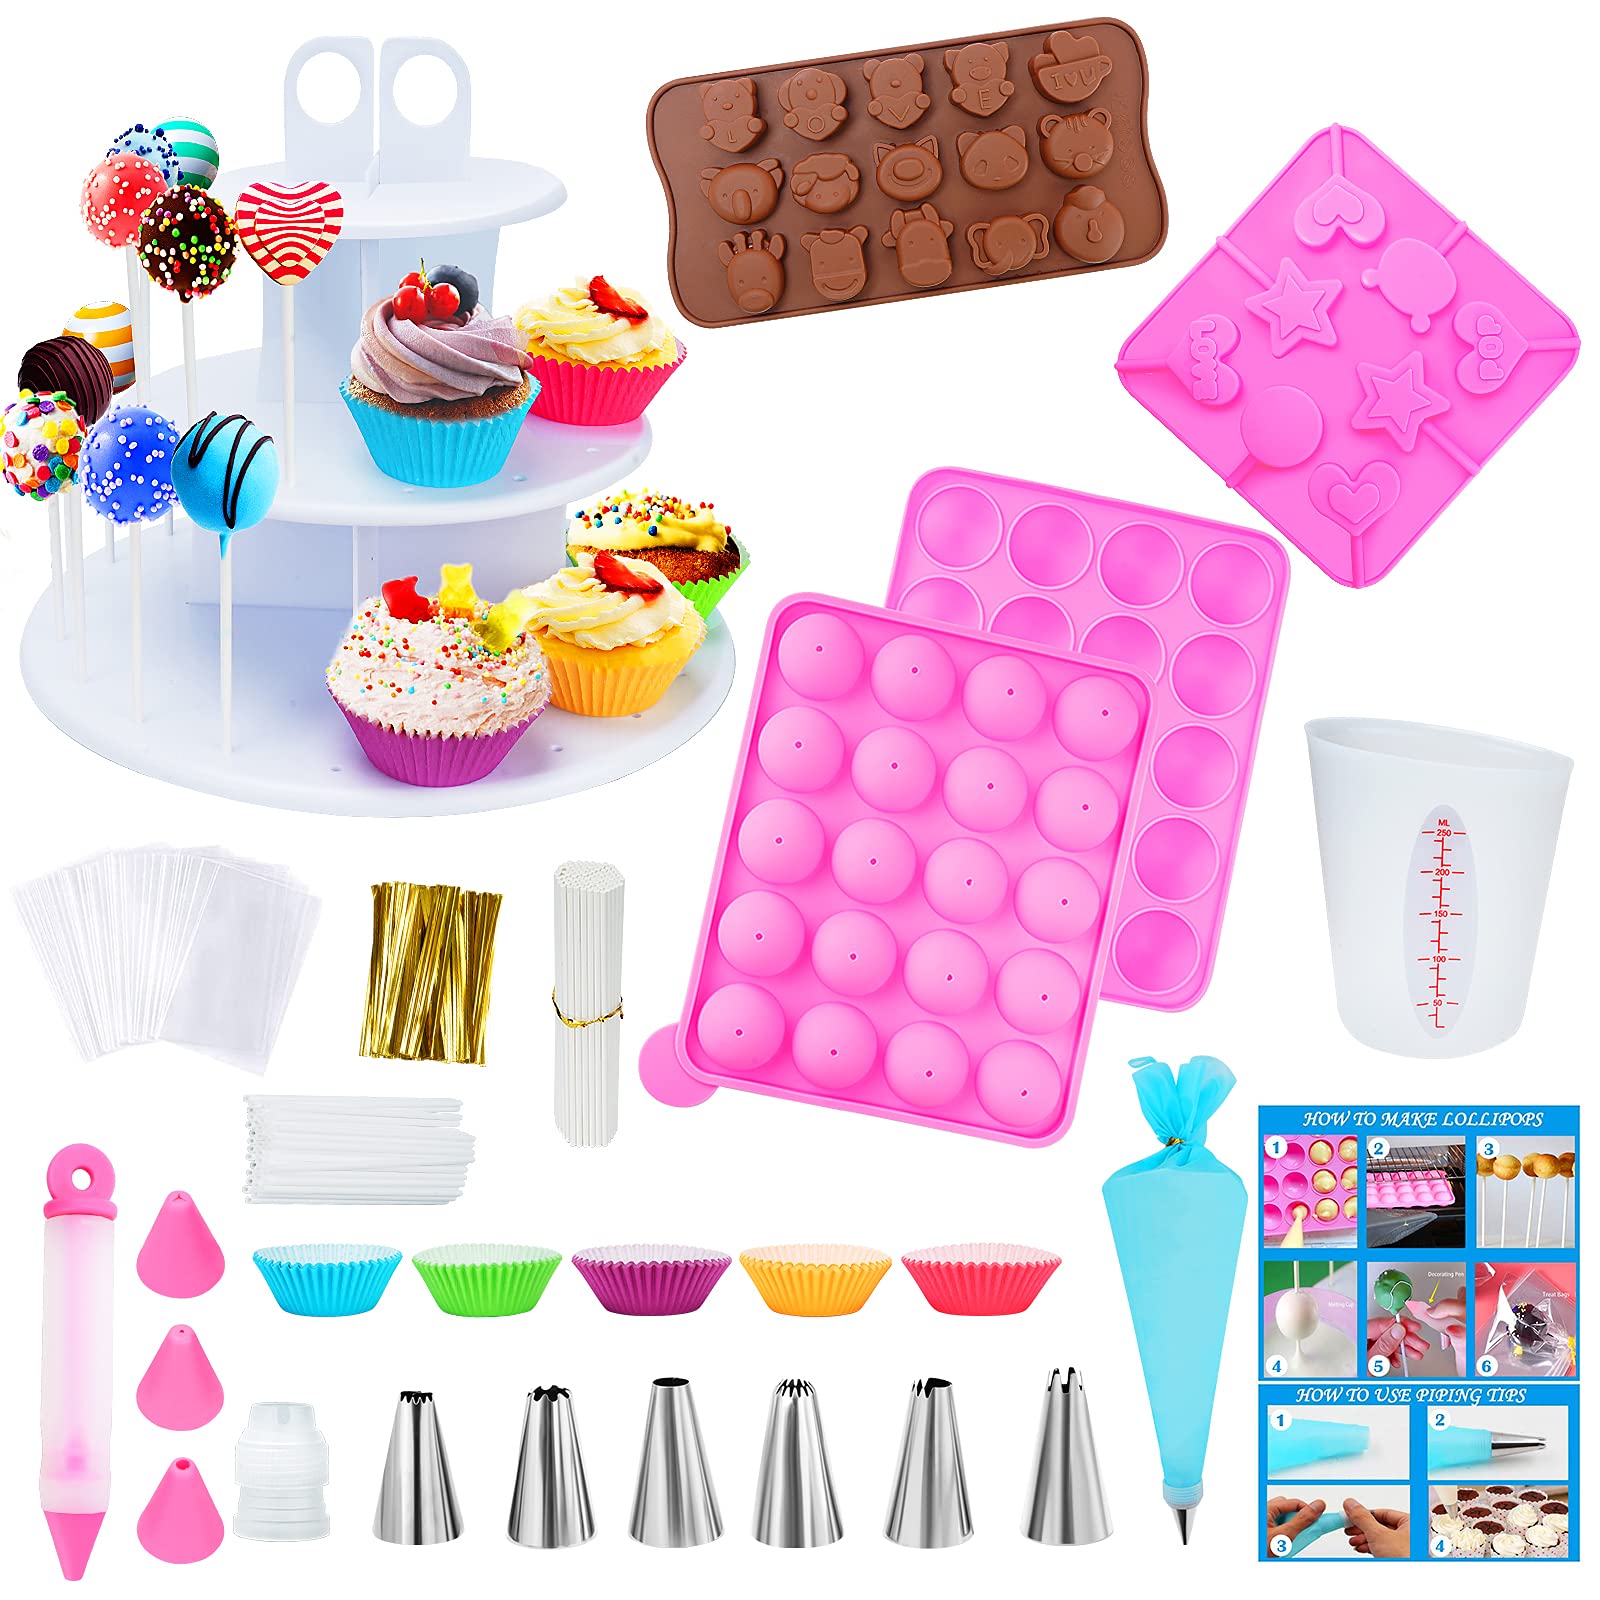 Ranchitel Cake Pop Maker Kit with 3 Silicone Mold Sets - 3 Tier Display Stand, Piping Tips and Coupler, Measuring Cup, Muffin Cu